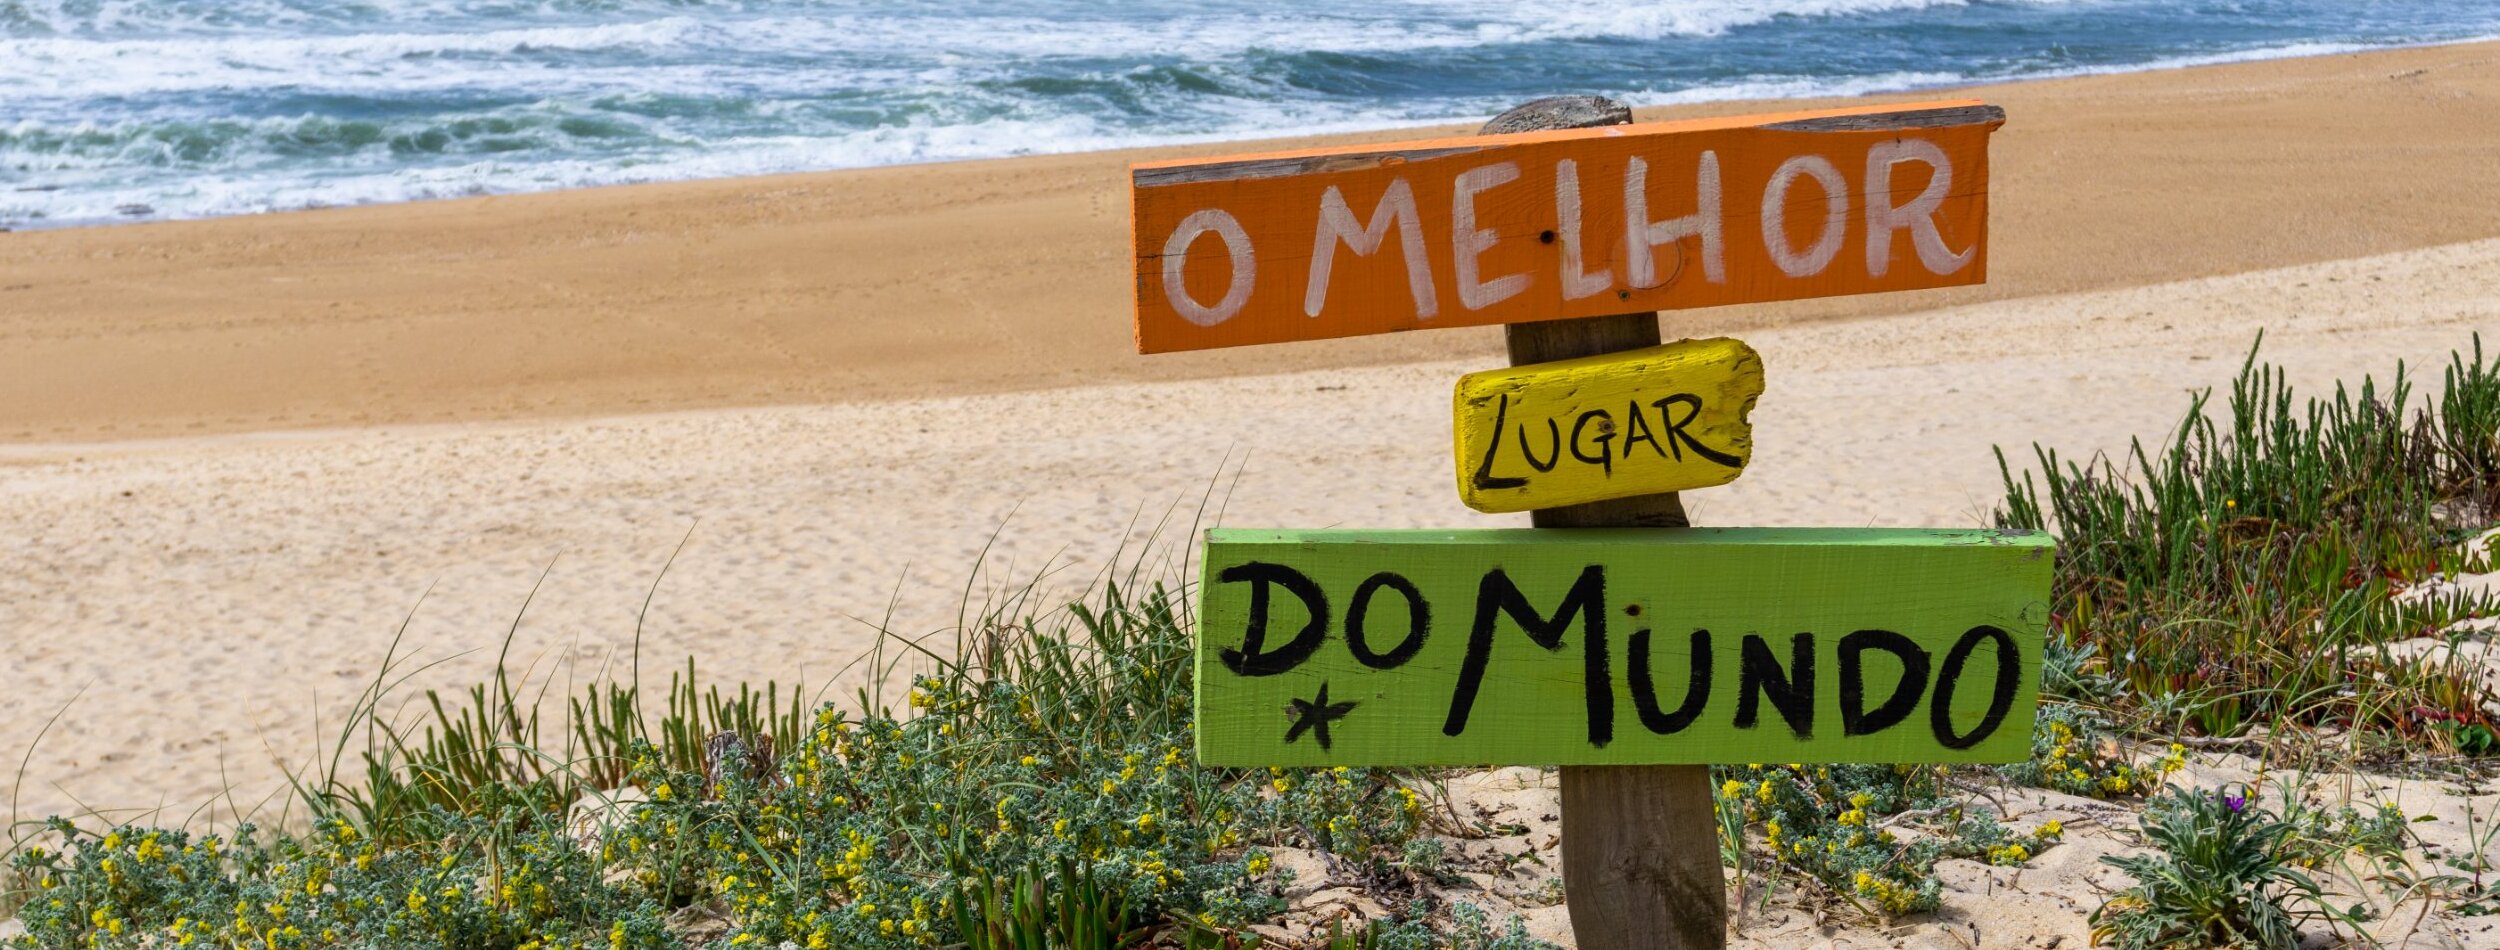 A board on the beach saying "The best place in the world" in portuguese